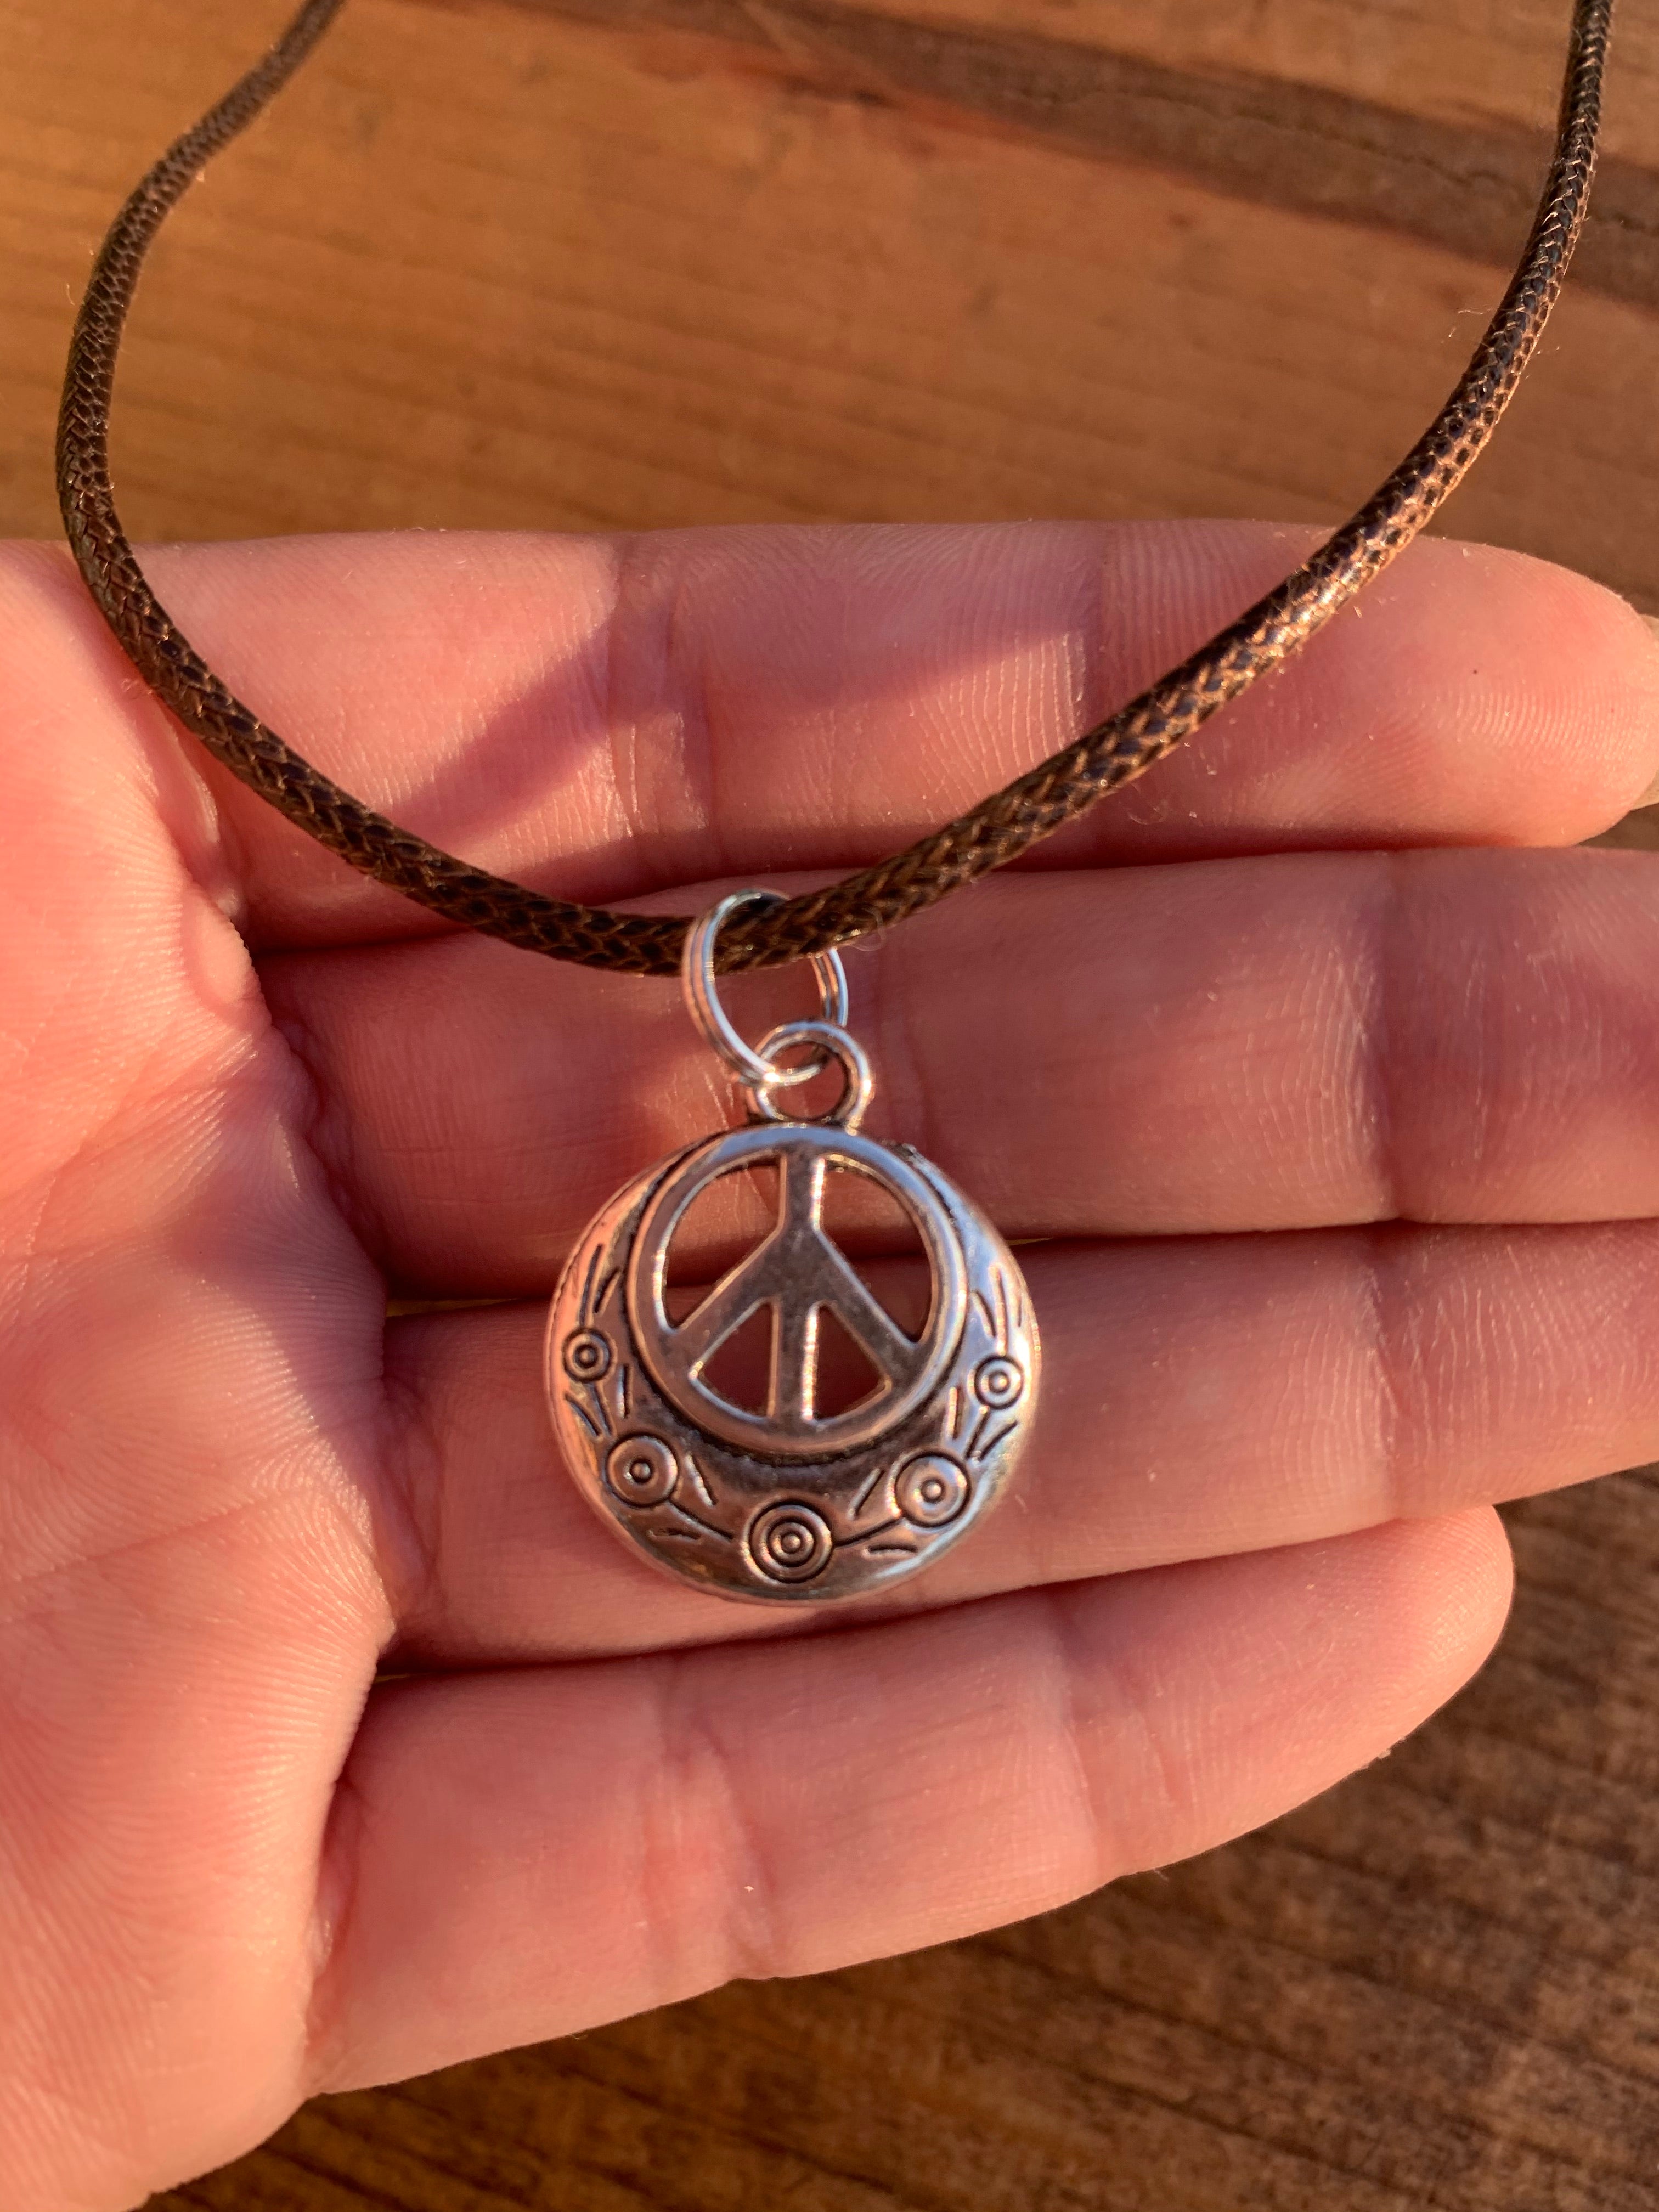 Large Peace Pendant Necklace Black Leather Cord .925 Sterling Silver |  Necklace, Peace jewelry, Peace sign pendant